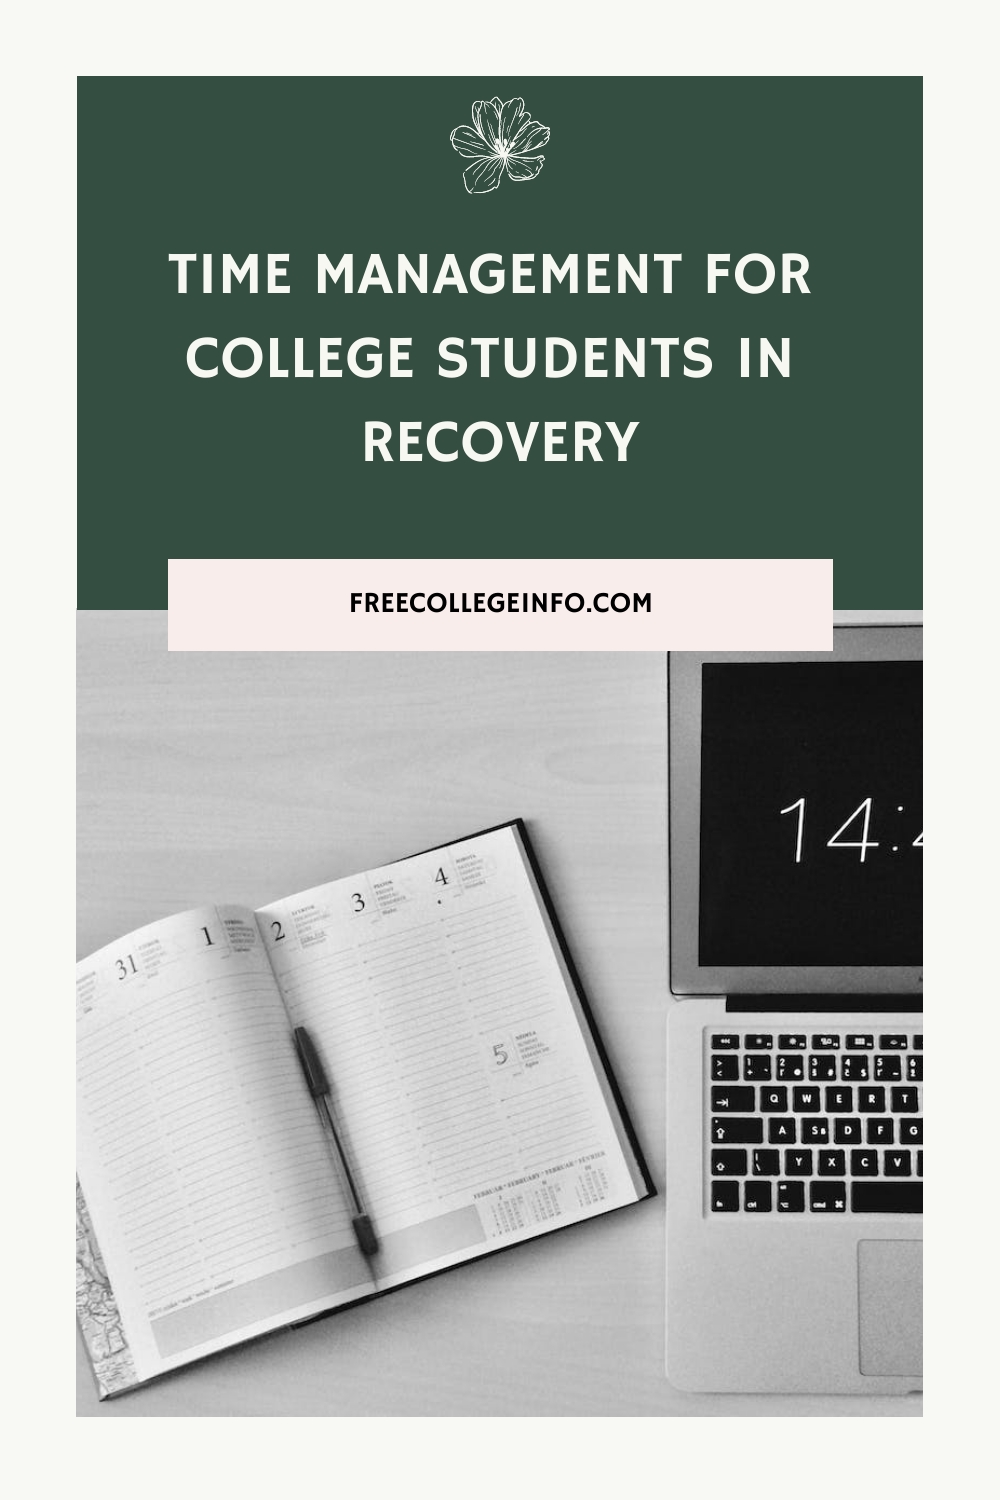 Time Management for College Students in Recovery